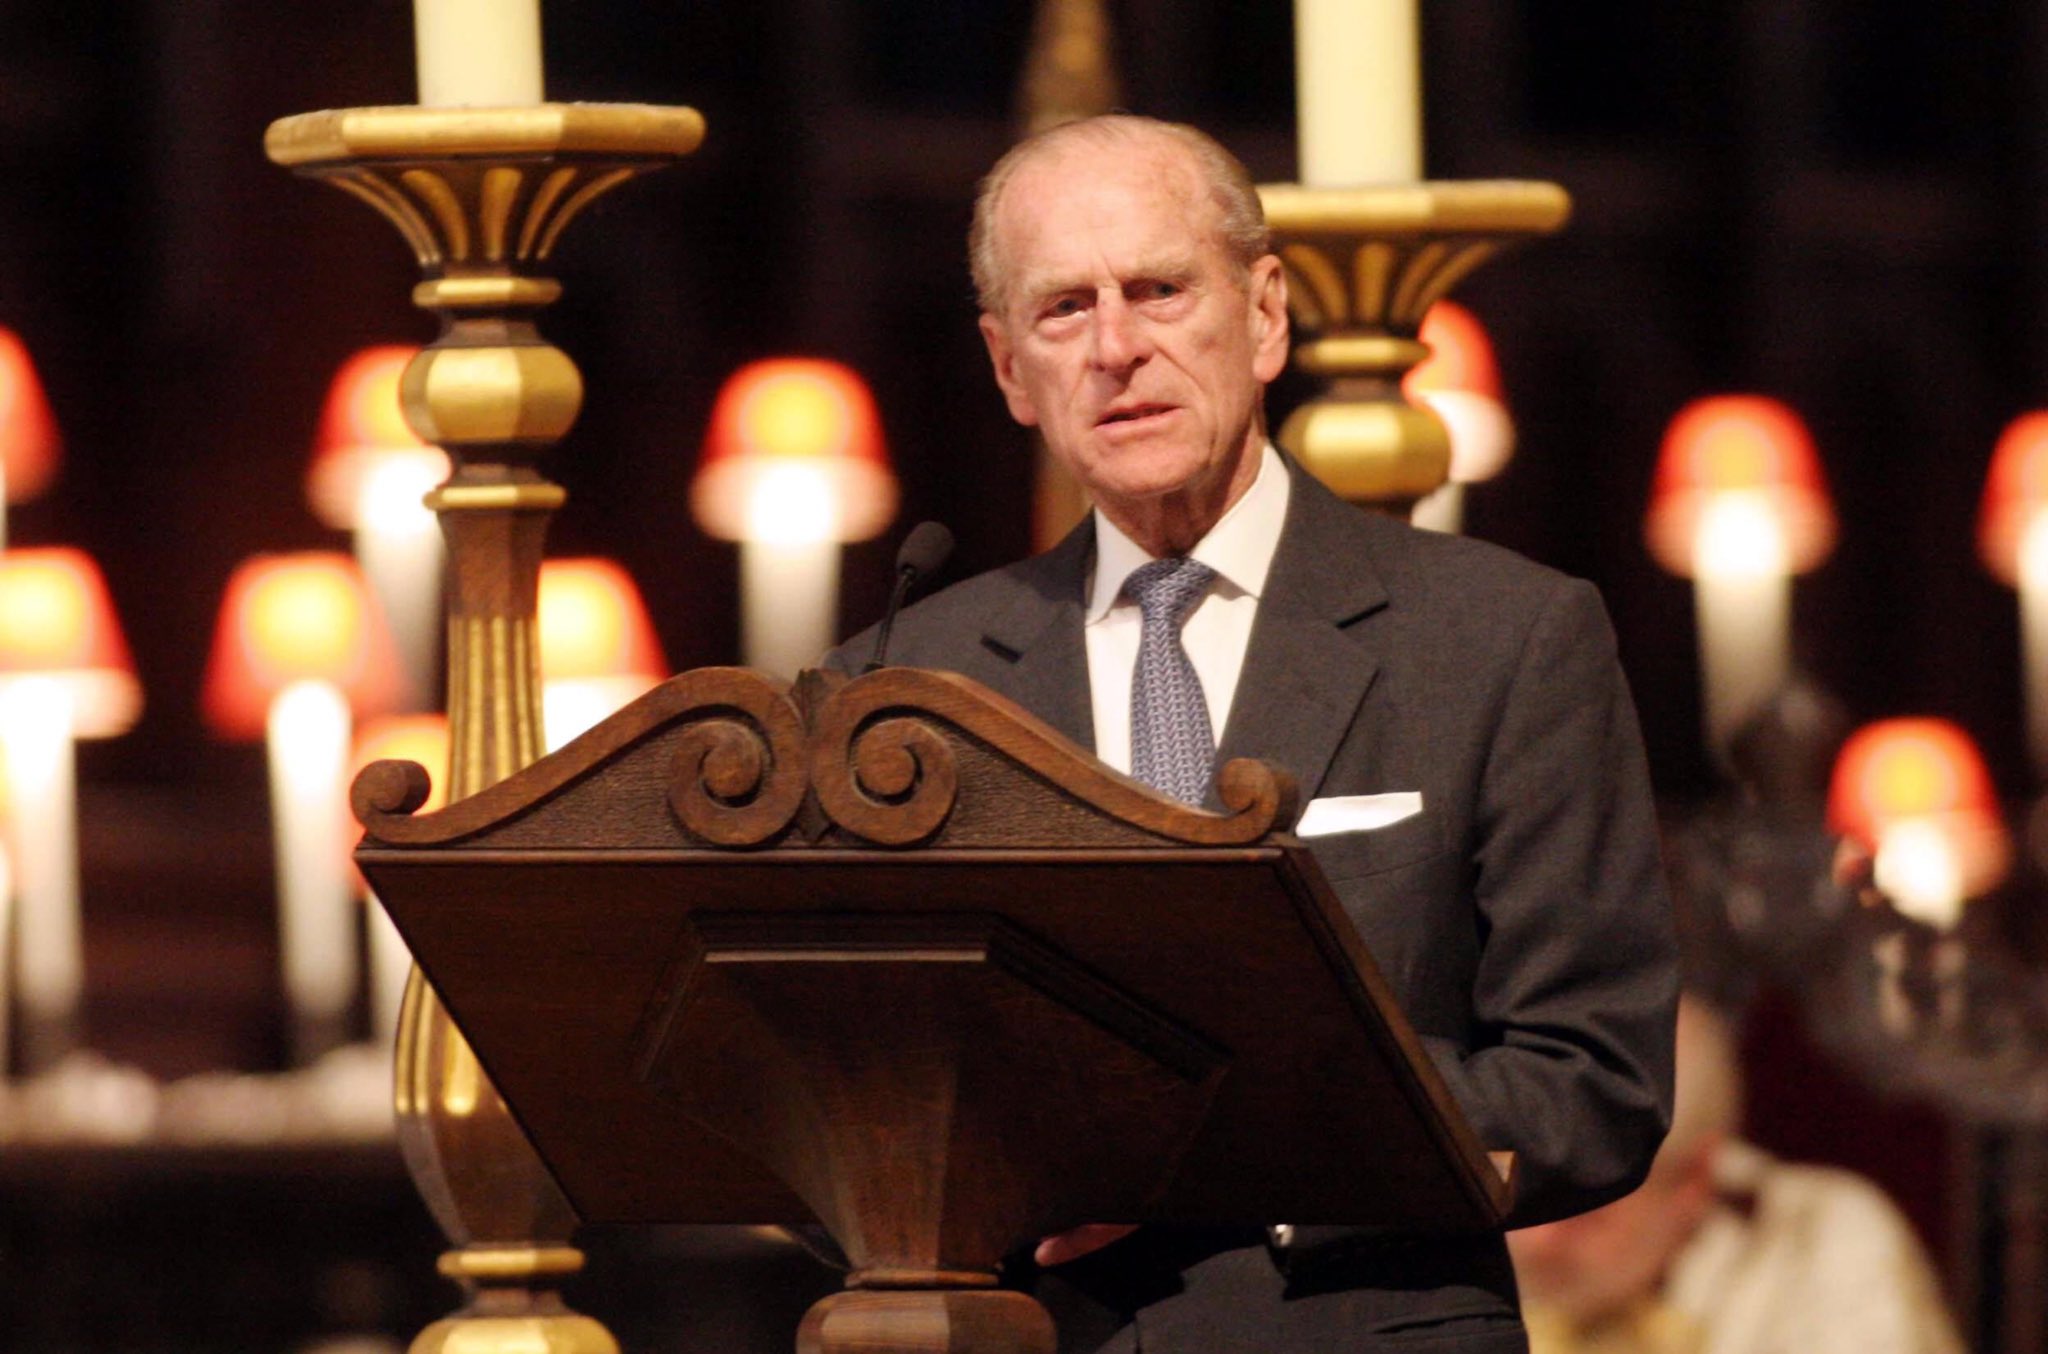 Prince Philip planned his own Funeral with many Military Details